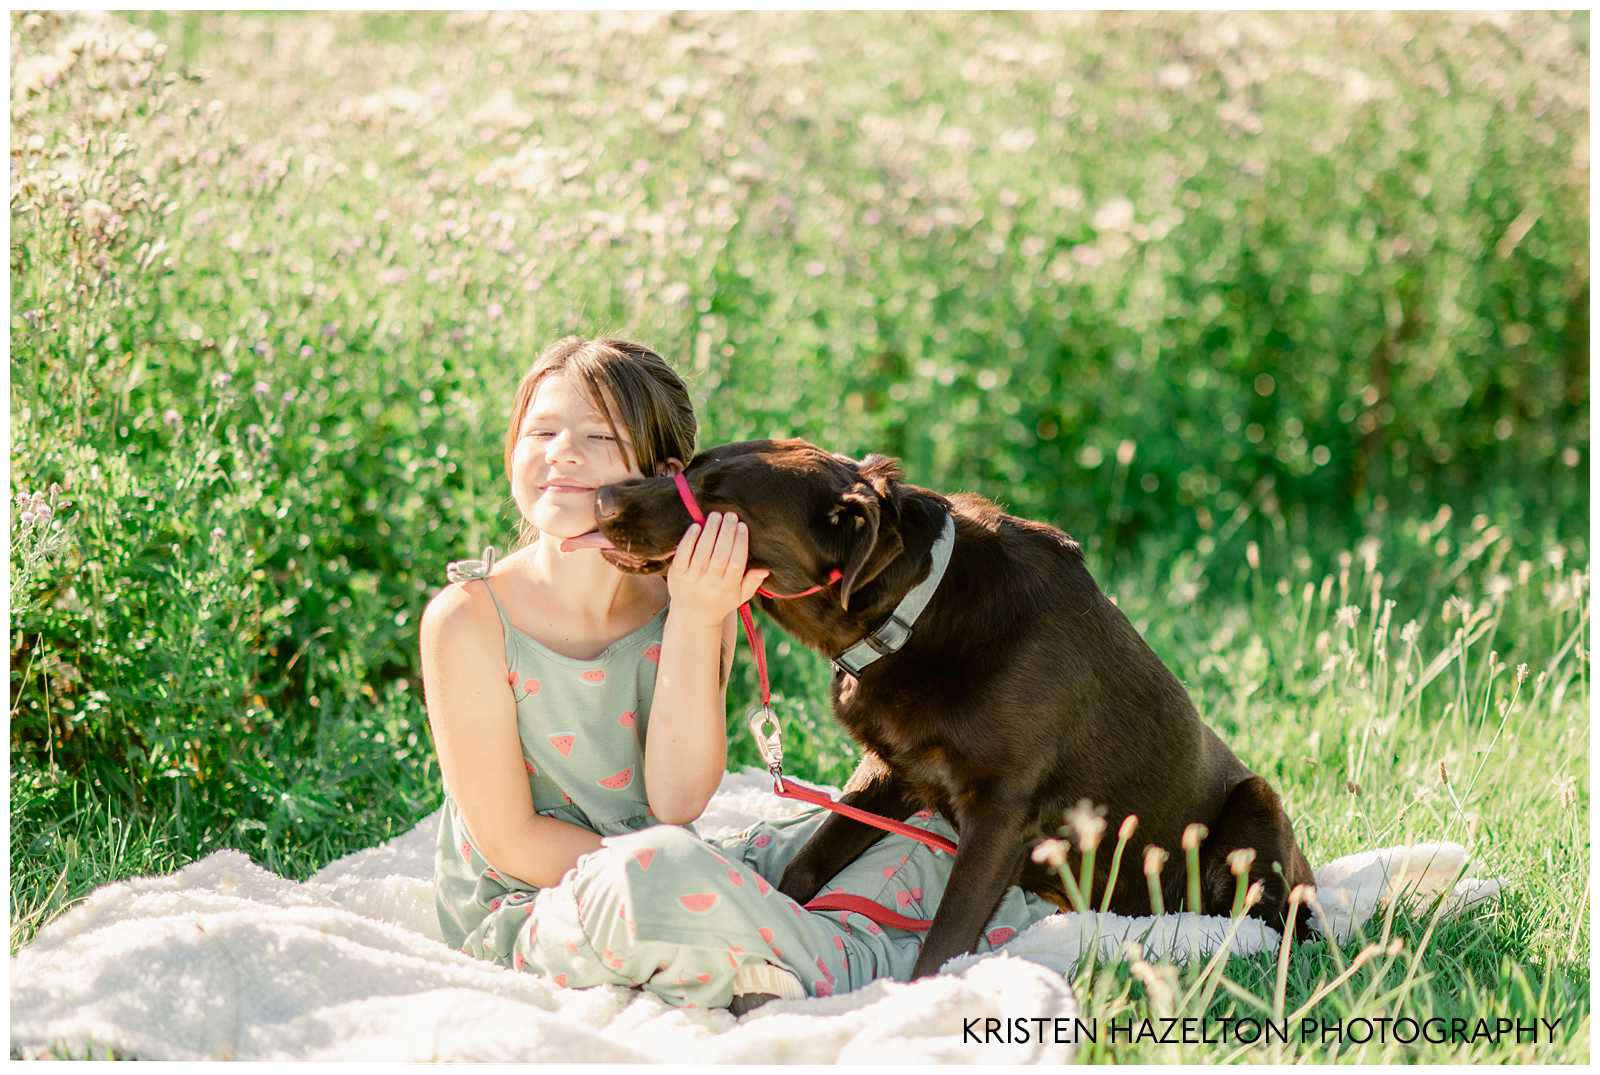 Young girl in a watermelon dress getting kisses from her brown dog.